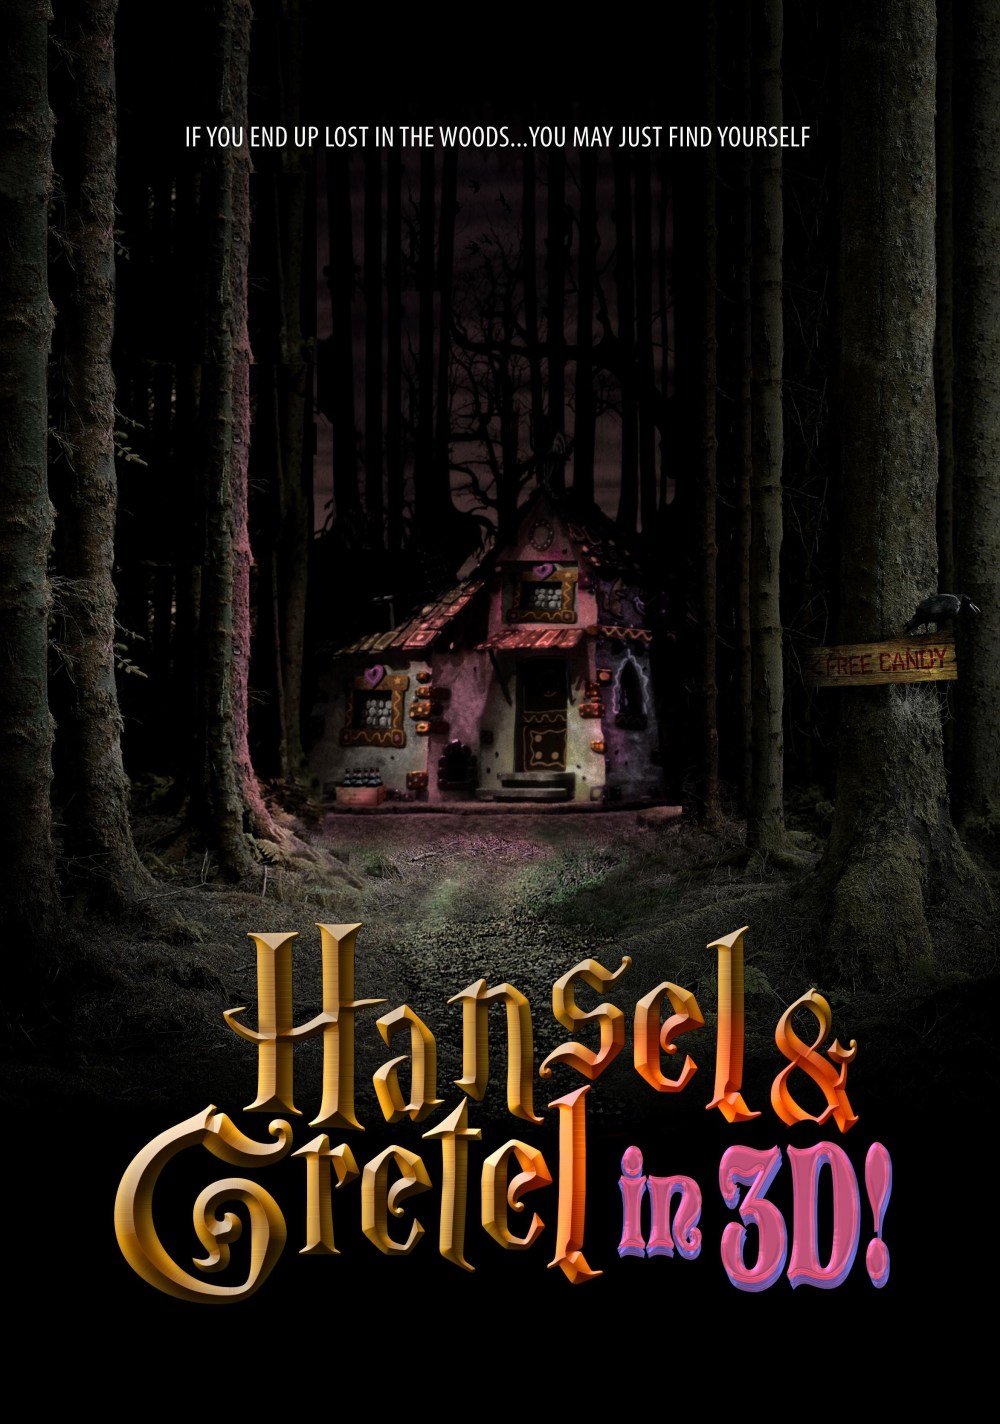 Teaserposter Hansel and Gretel in 3D